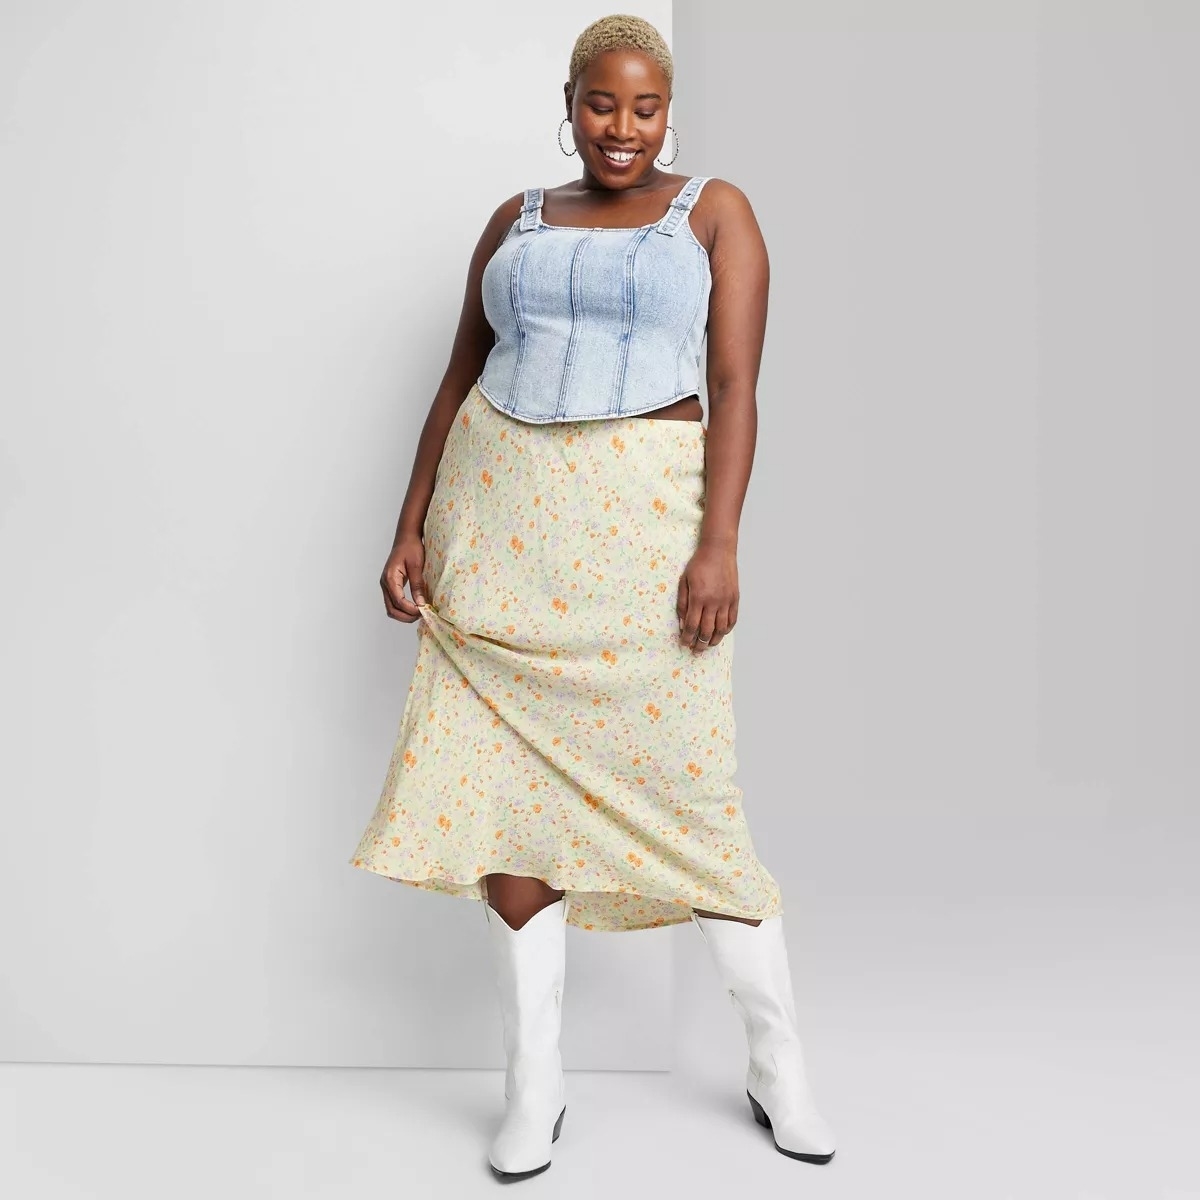 model in a sleeveless top, floral skirt, and white boots, posing with hand on skirt hem